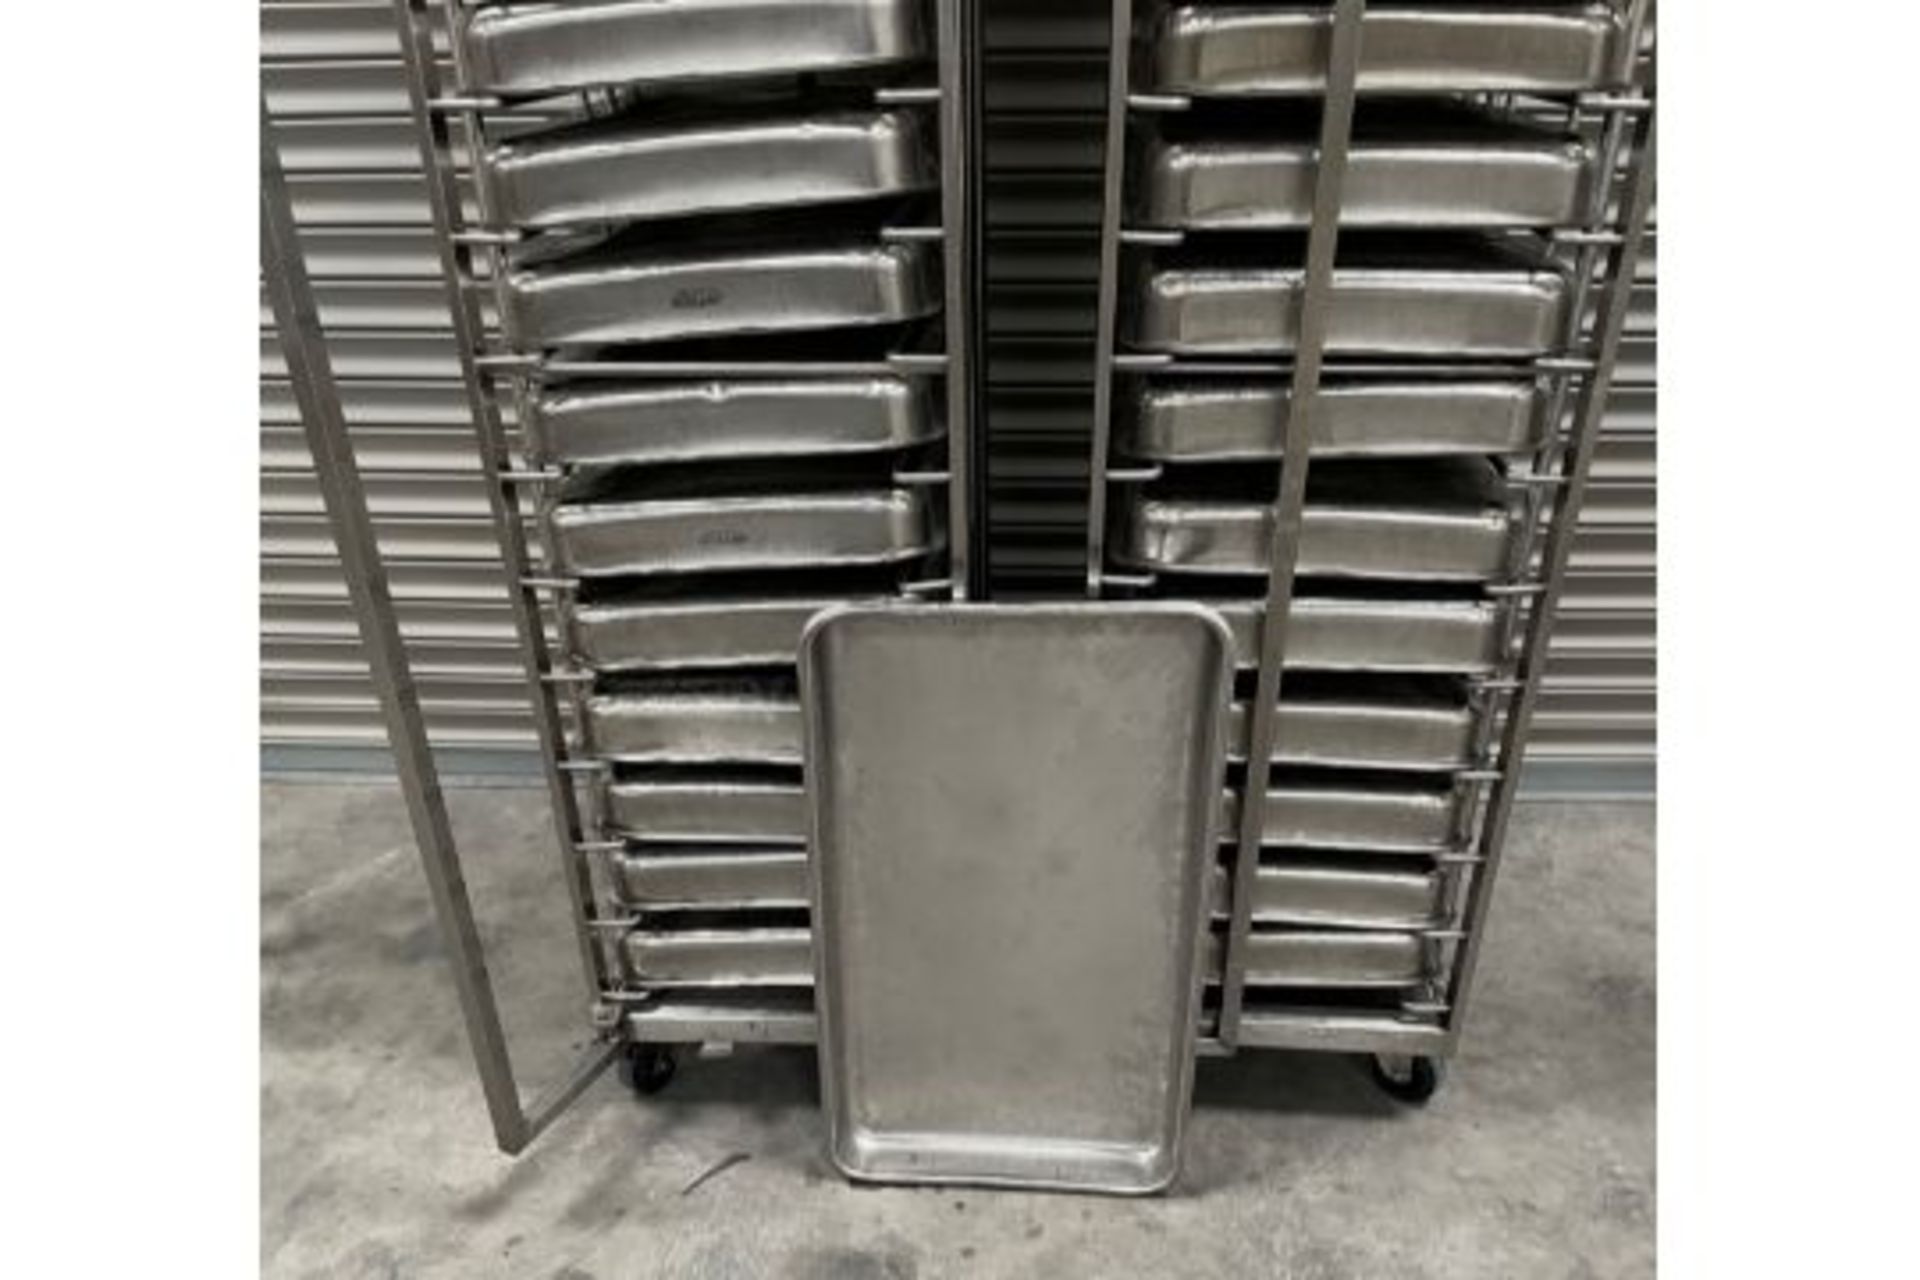 2 X UNITECH S/S RACKS COMPLETE WITH 14 GASTRO TRAYS IN EACH RACK - Image 2 of 2